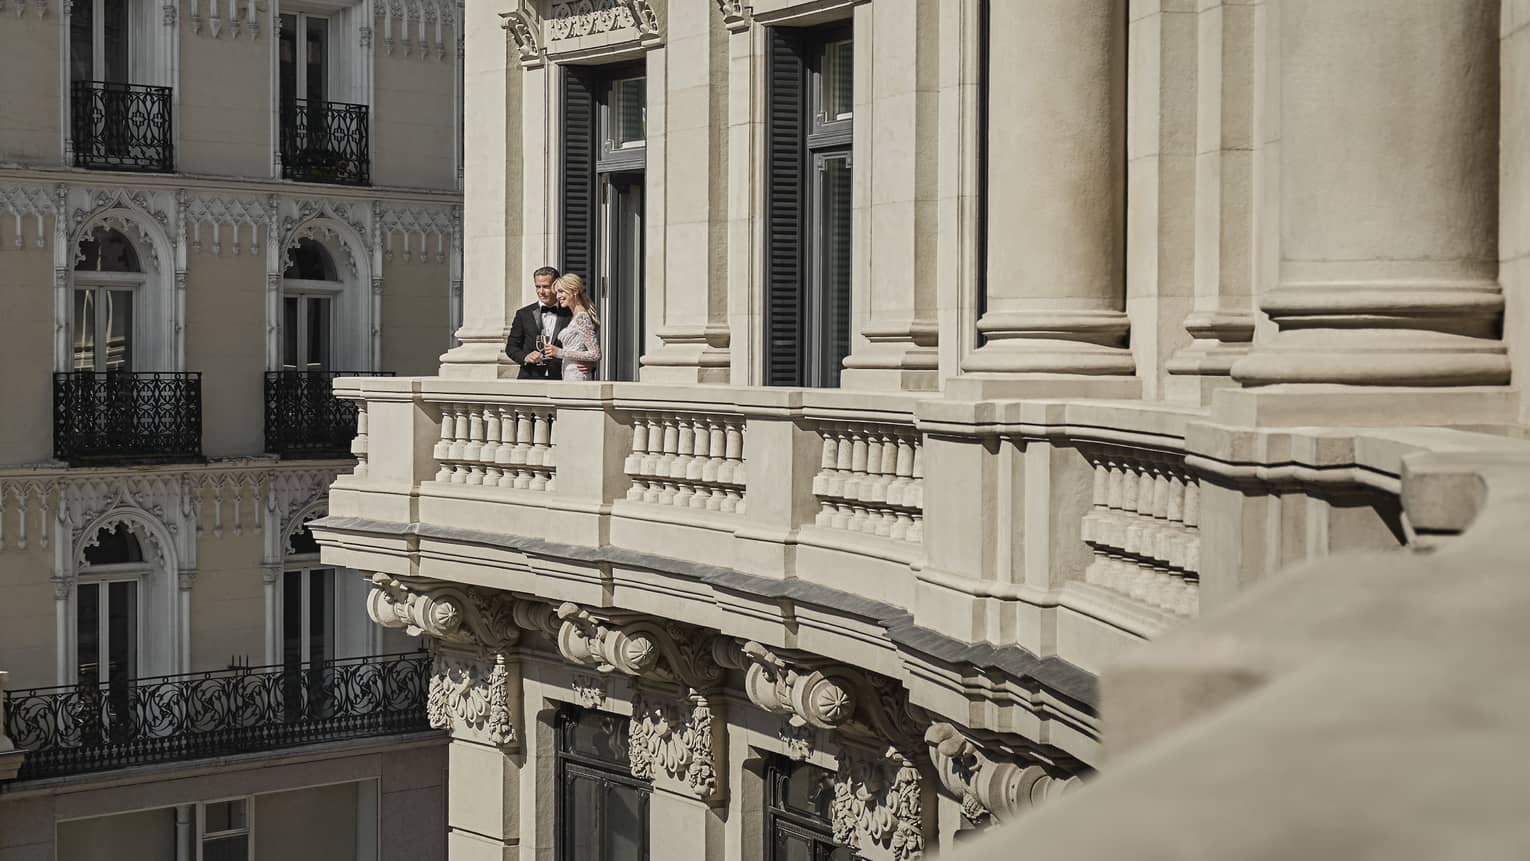 A wedding couple standing on the balcony of the hotel.